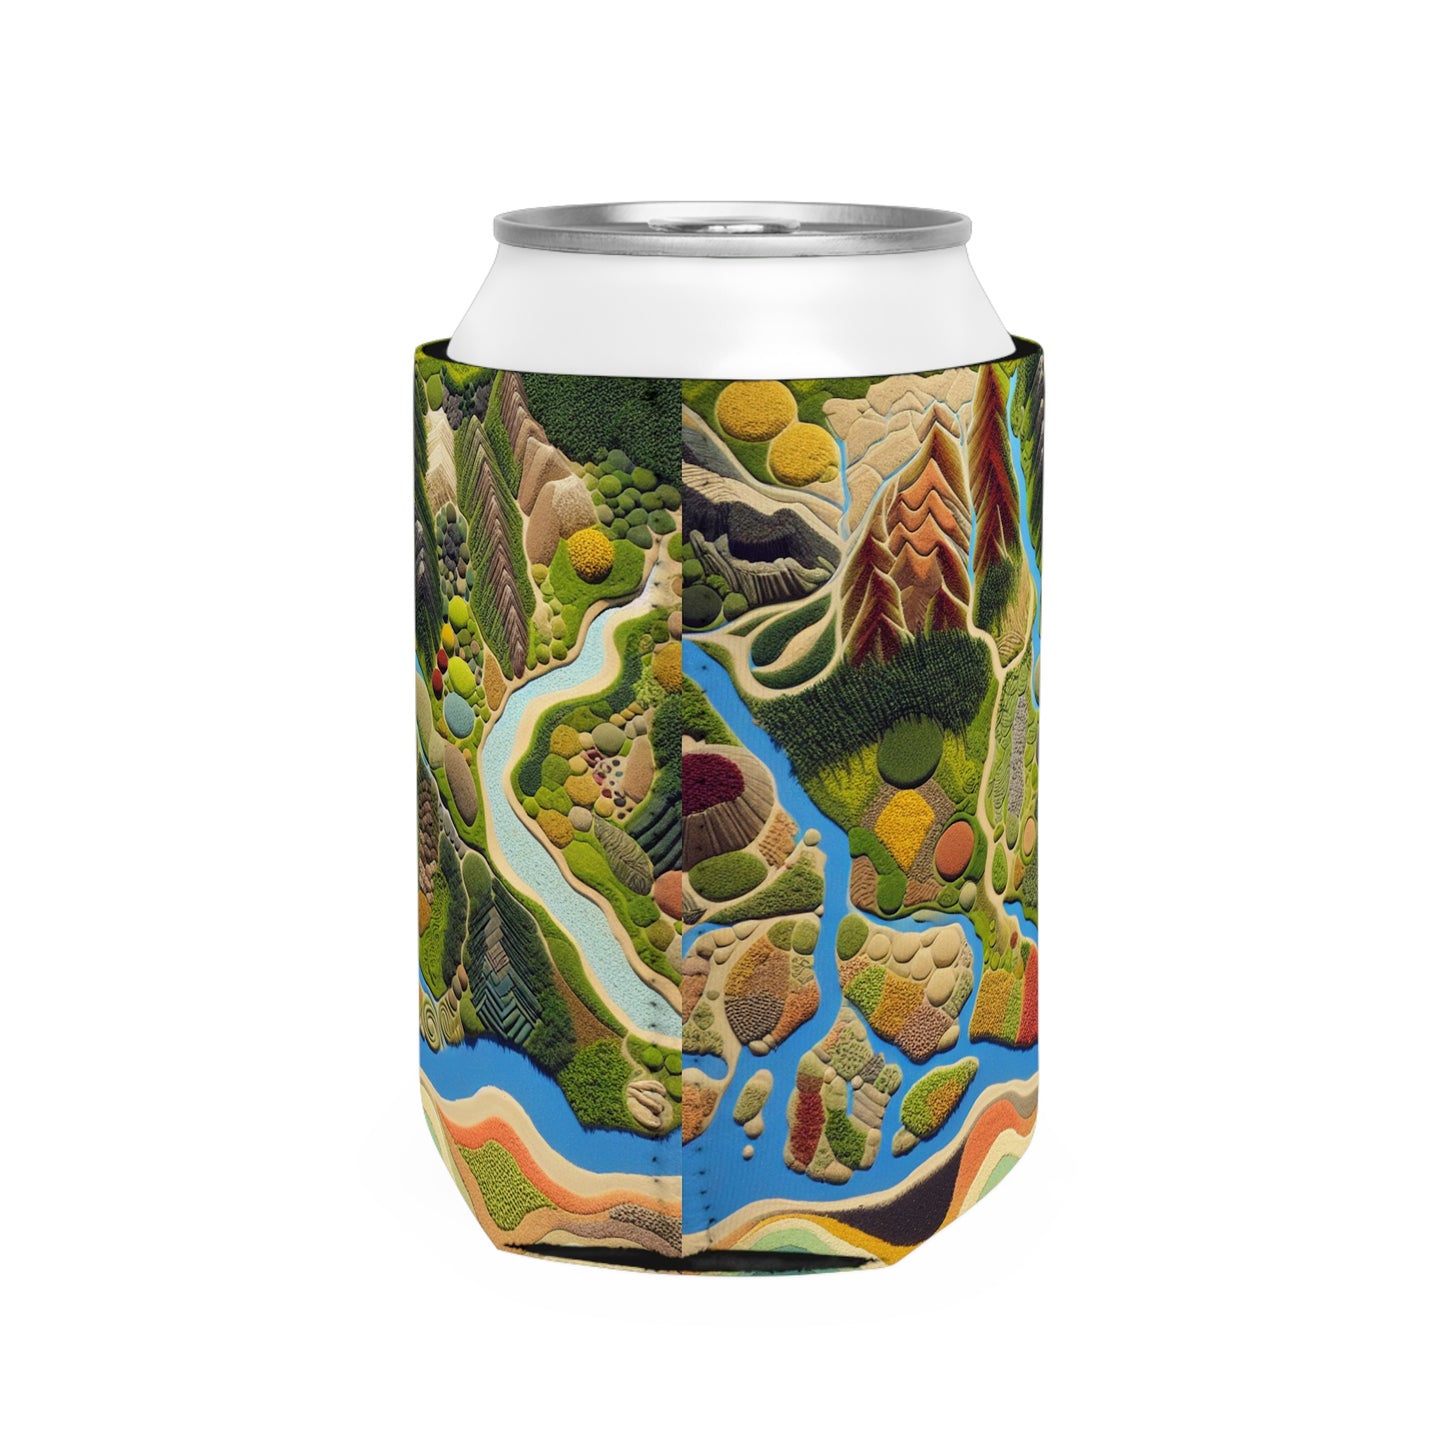 "Mapping Mother Nature: Crafting a Living Mural of Our Region". - The Alien Can Cooler Sleeve Land Art Style